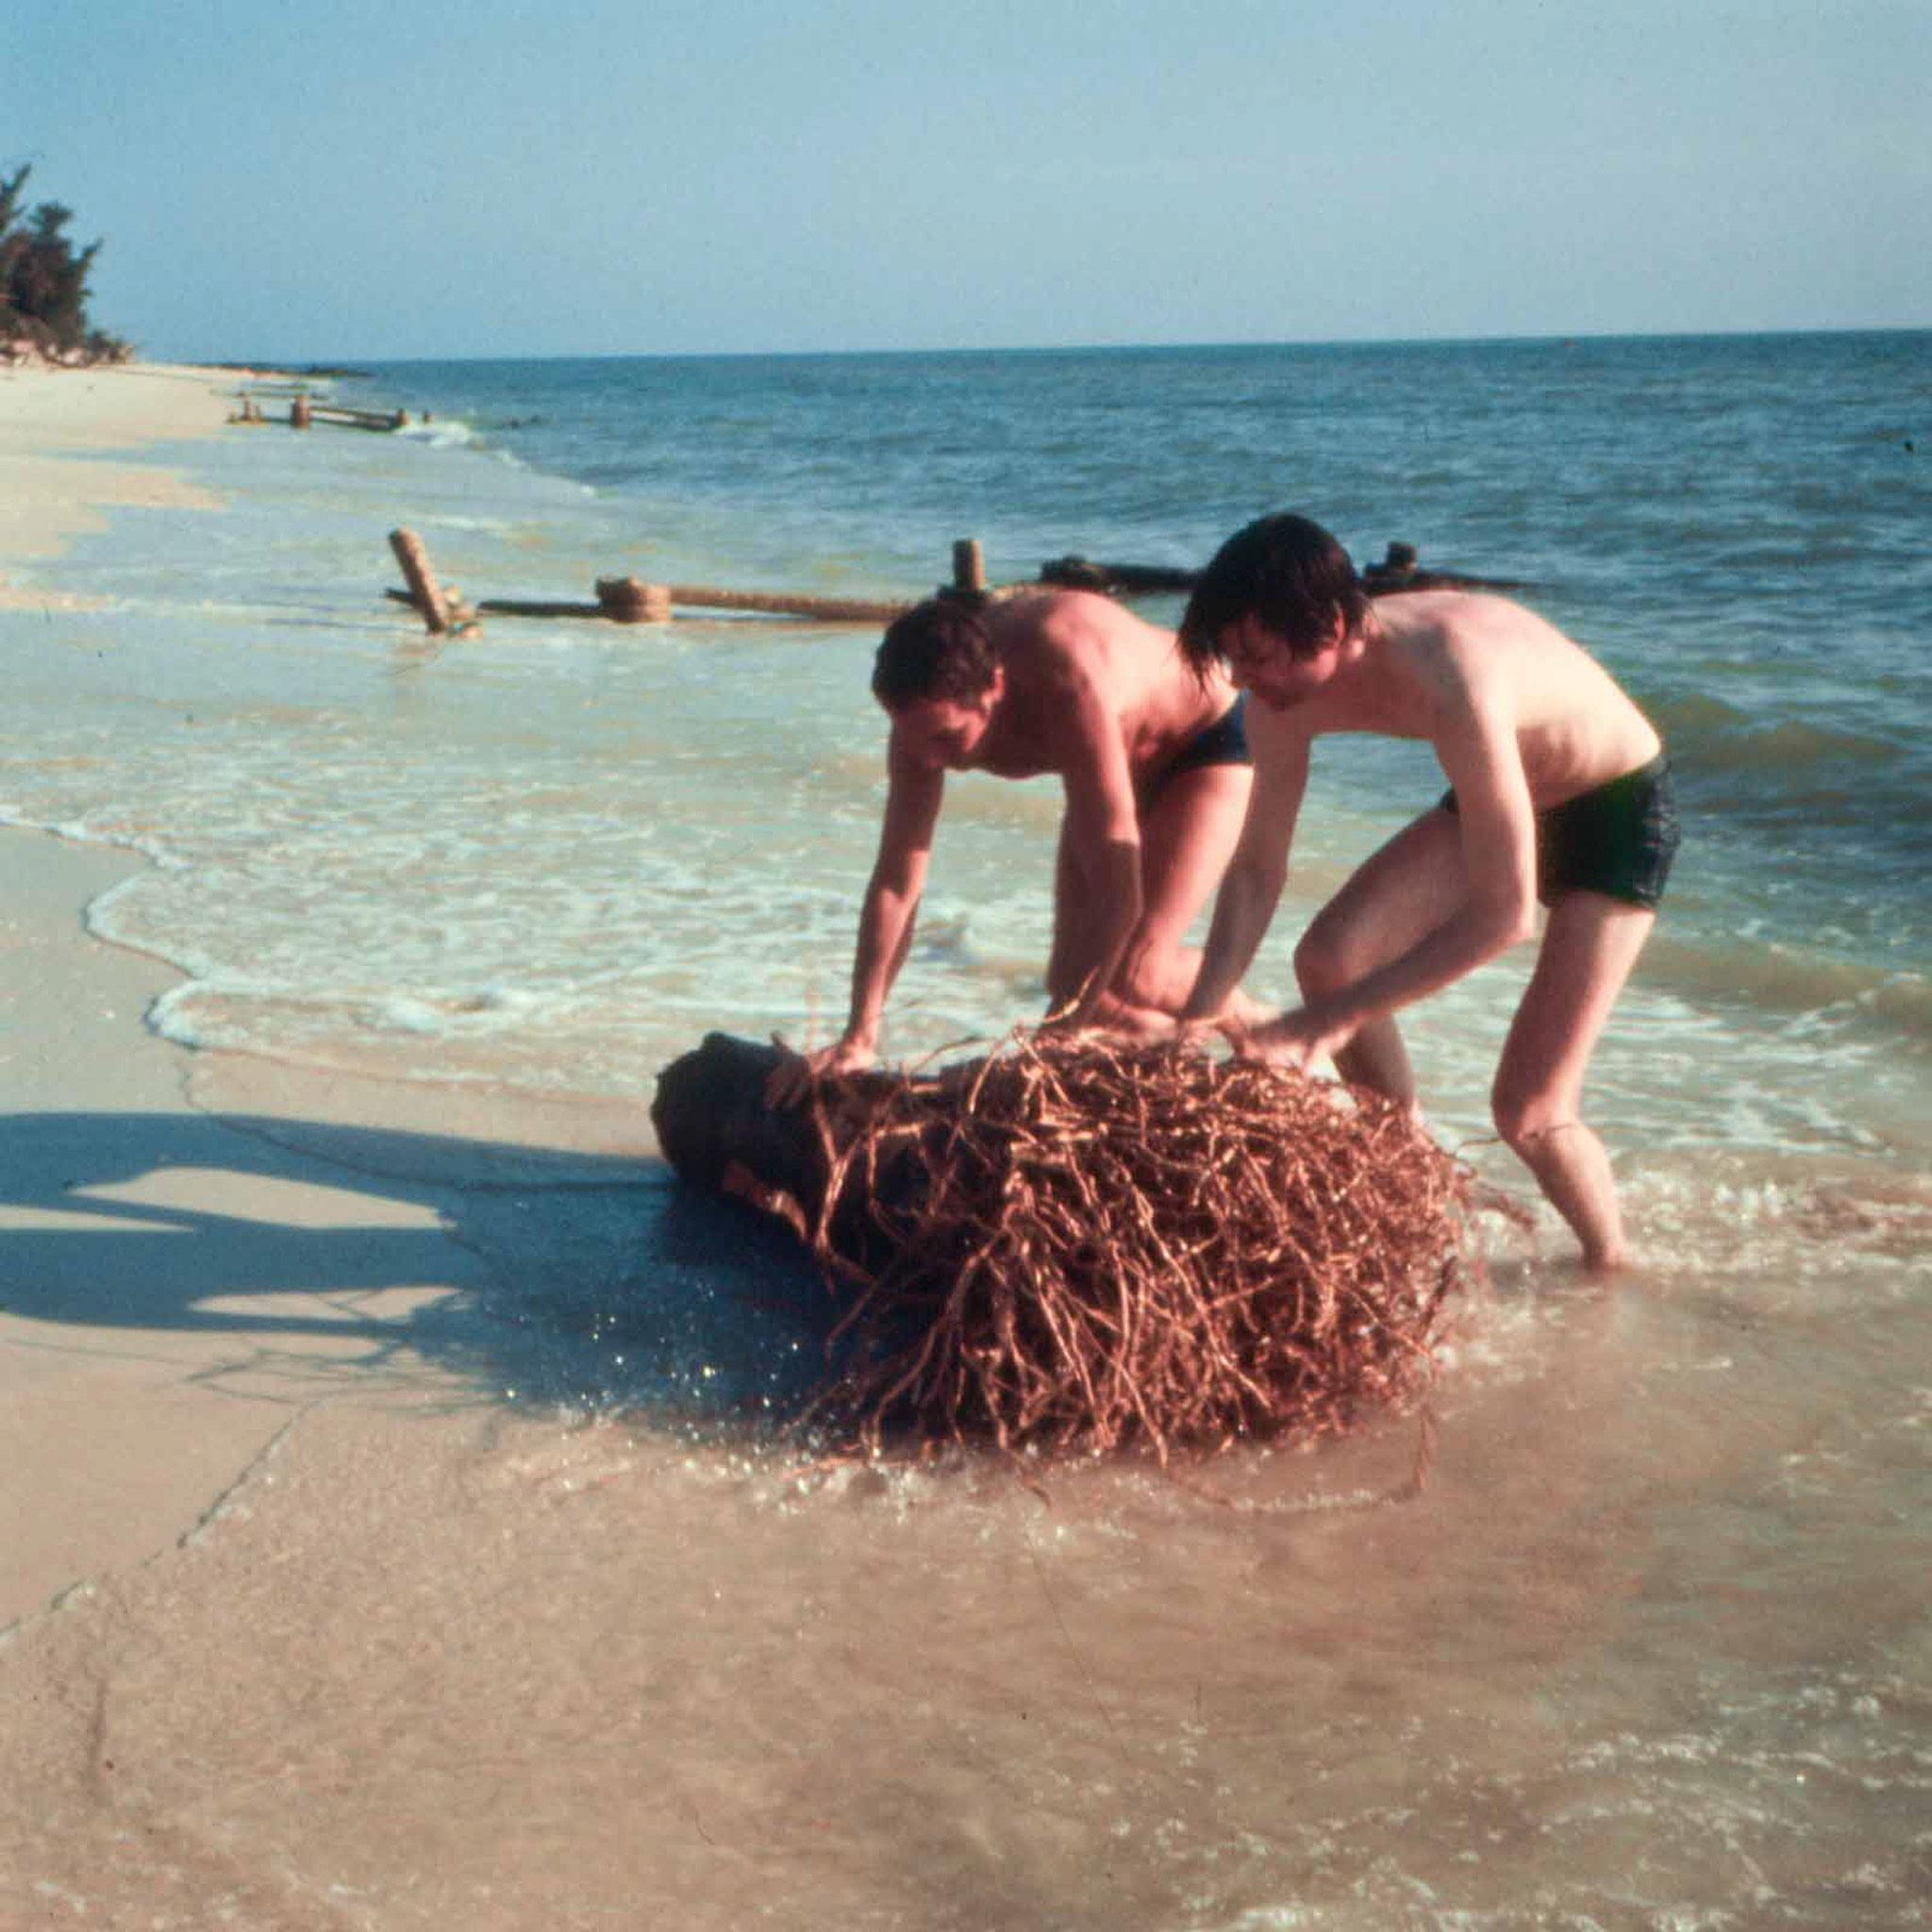 Two people rolling a tree out of the water onto a beach